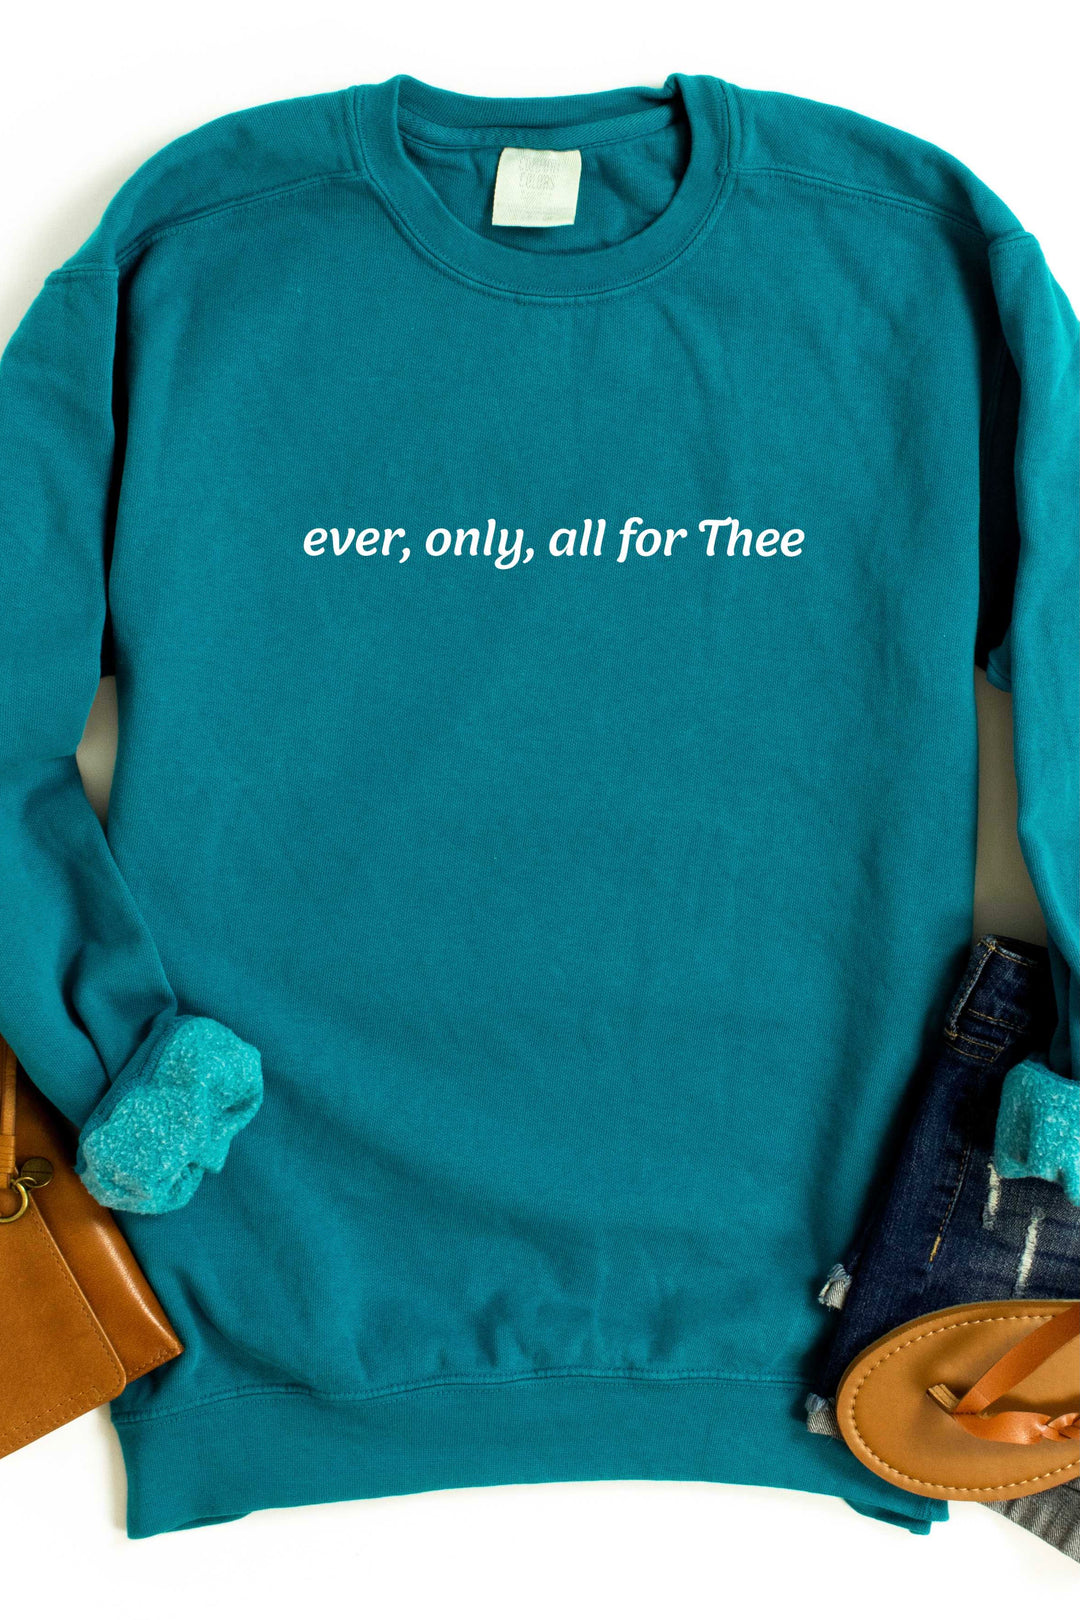 Ever, Only, All for Thee (Print) Crewneck Pullover